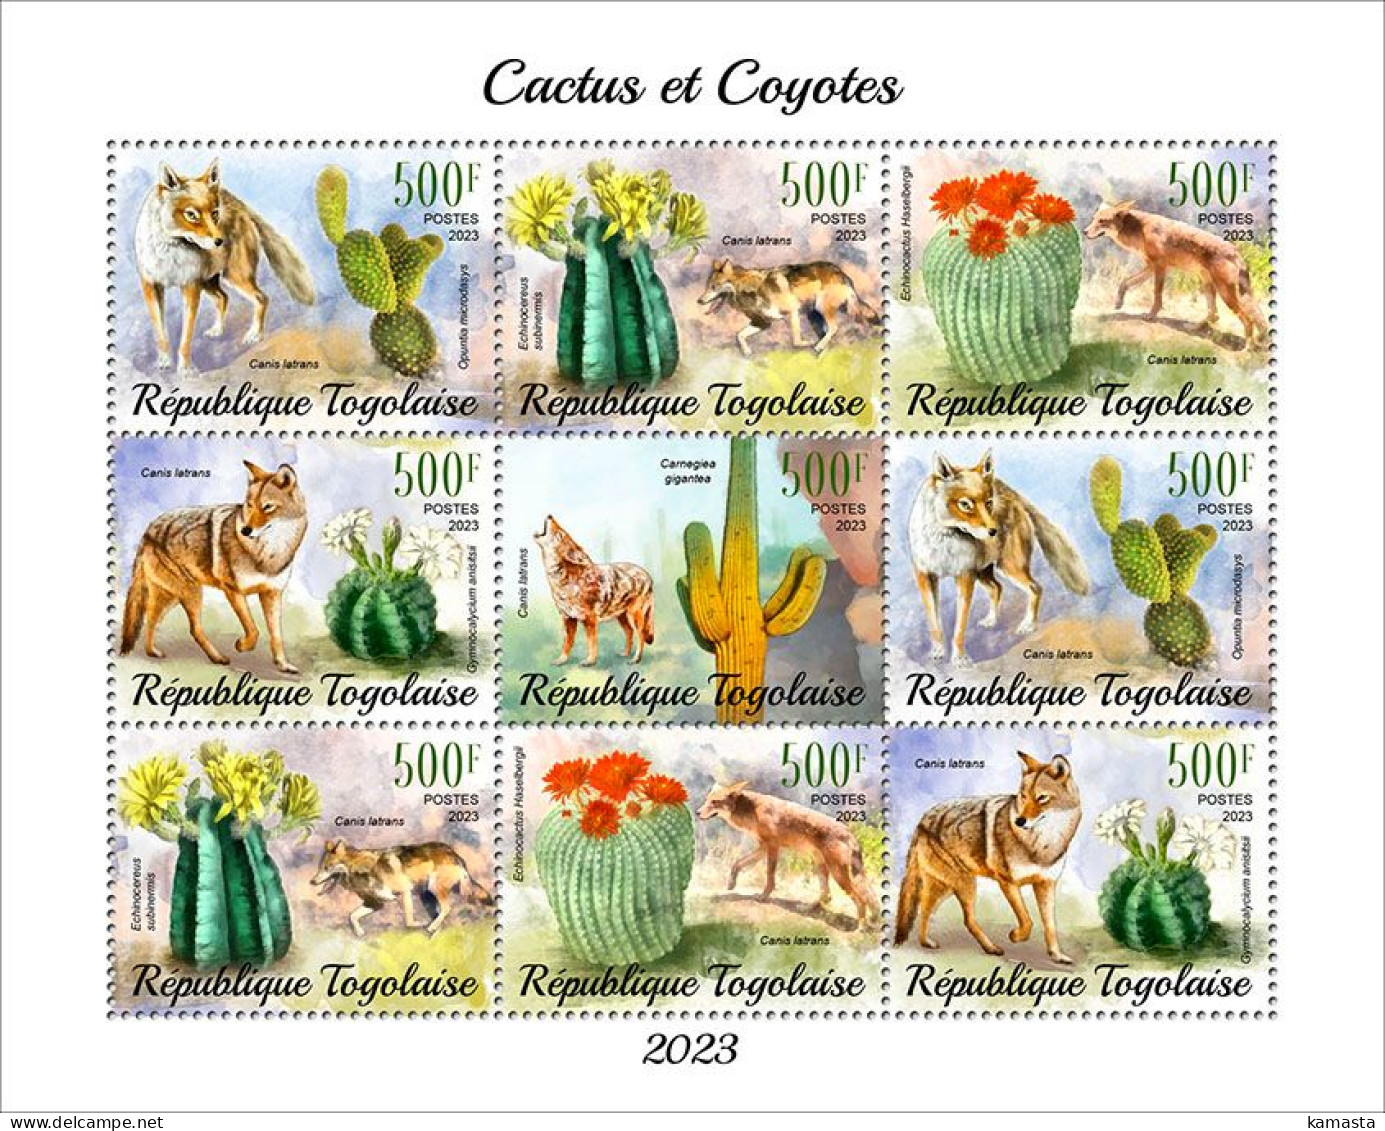 Togo 2023 Cactus And Coyotes. (249f22) OFFICIAL ISSUE - Sukkulenten